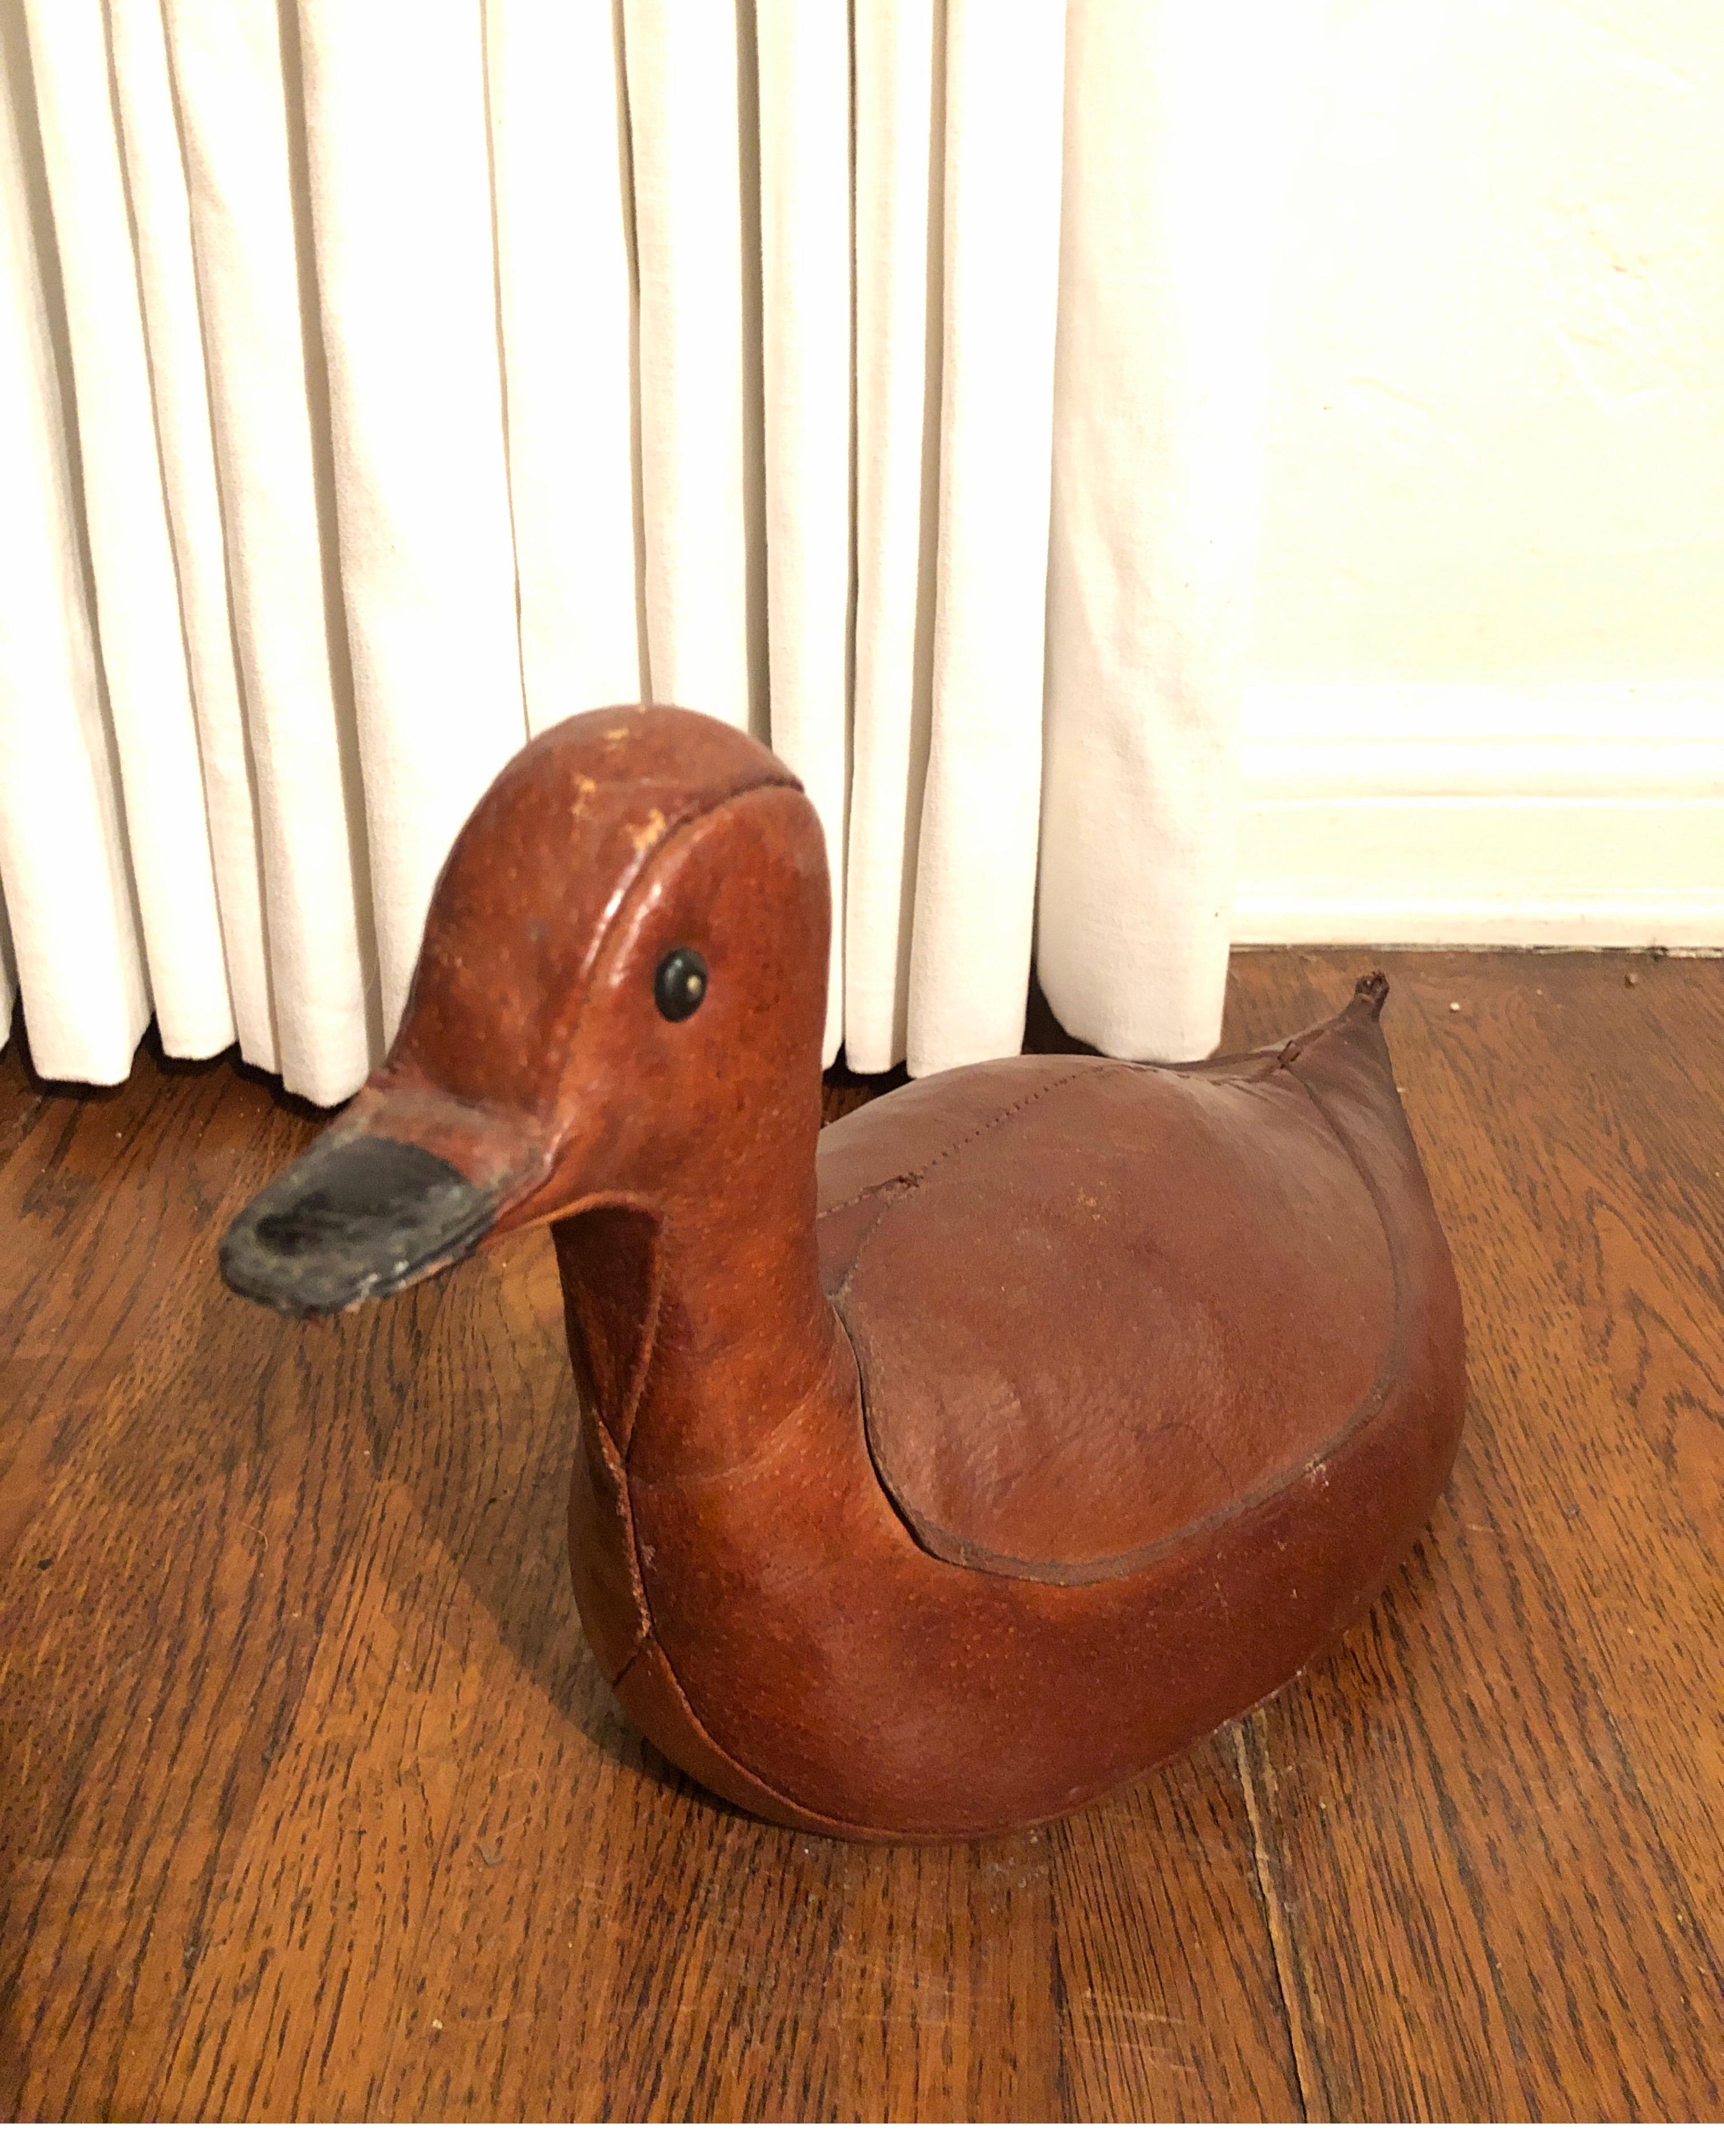 This is a beautiful leather doorstop by Dimitri Omersa in the shape of a duck. Omersa Co., England, produced several animals as footstools and doorstops for Abercrombie and Fitch. This sweet duck is a wonderful conversation piece and useful as a